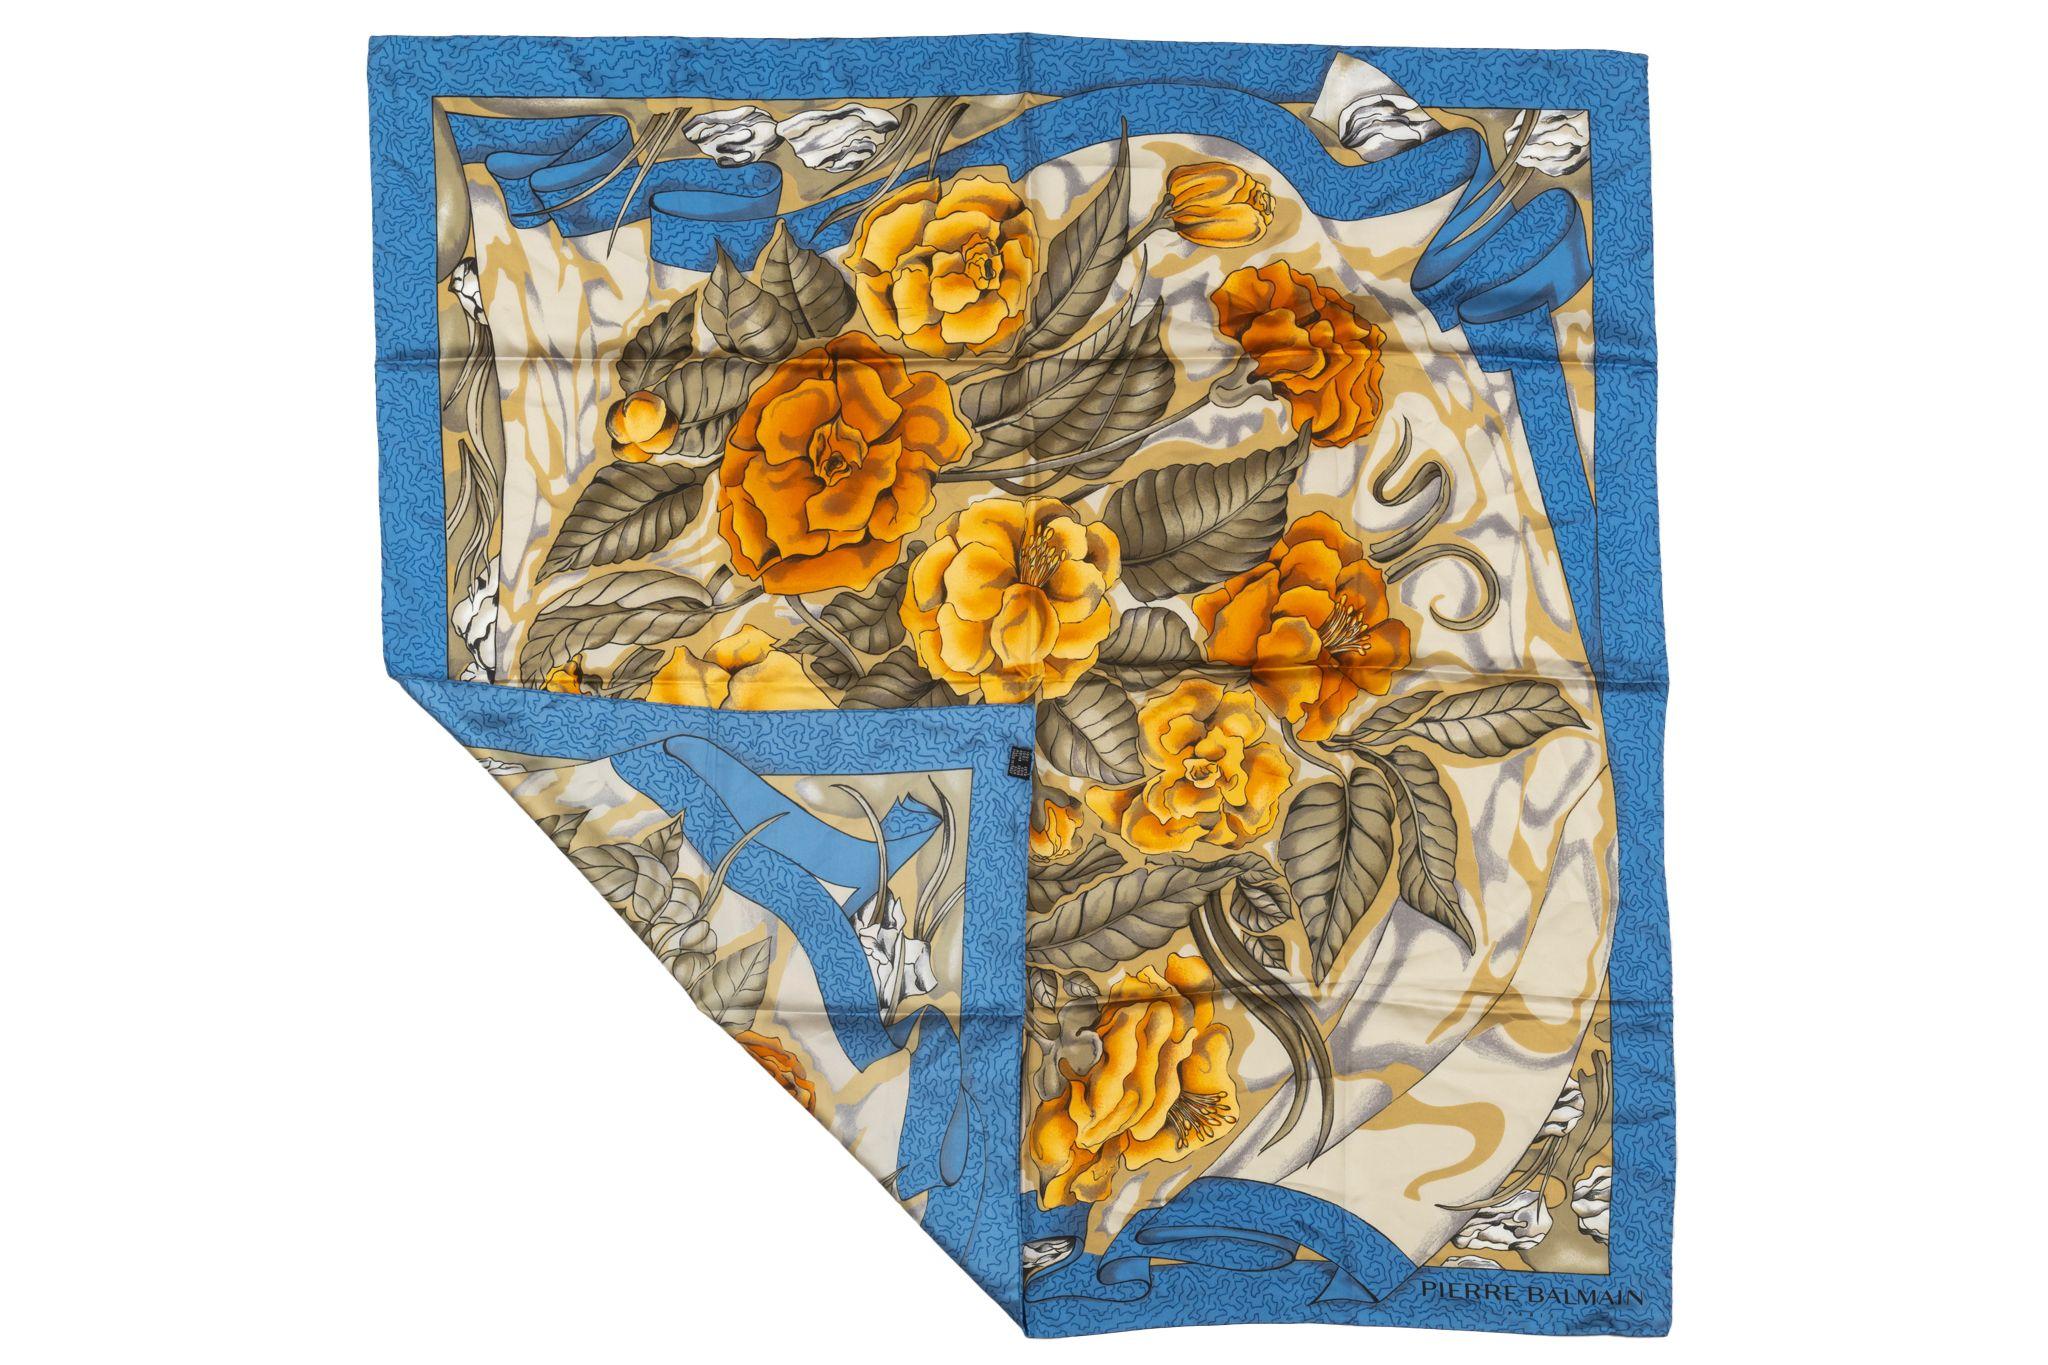 Balmain Vintage Floral Silk Scarf in light blue. The pattern features flowers in a gold tone. Piece is in excellent condition.